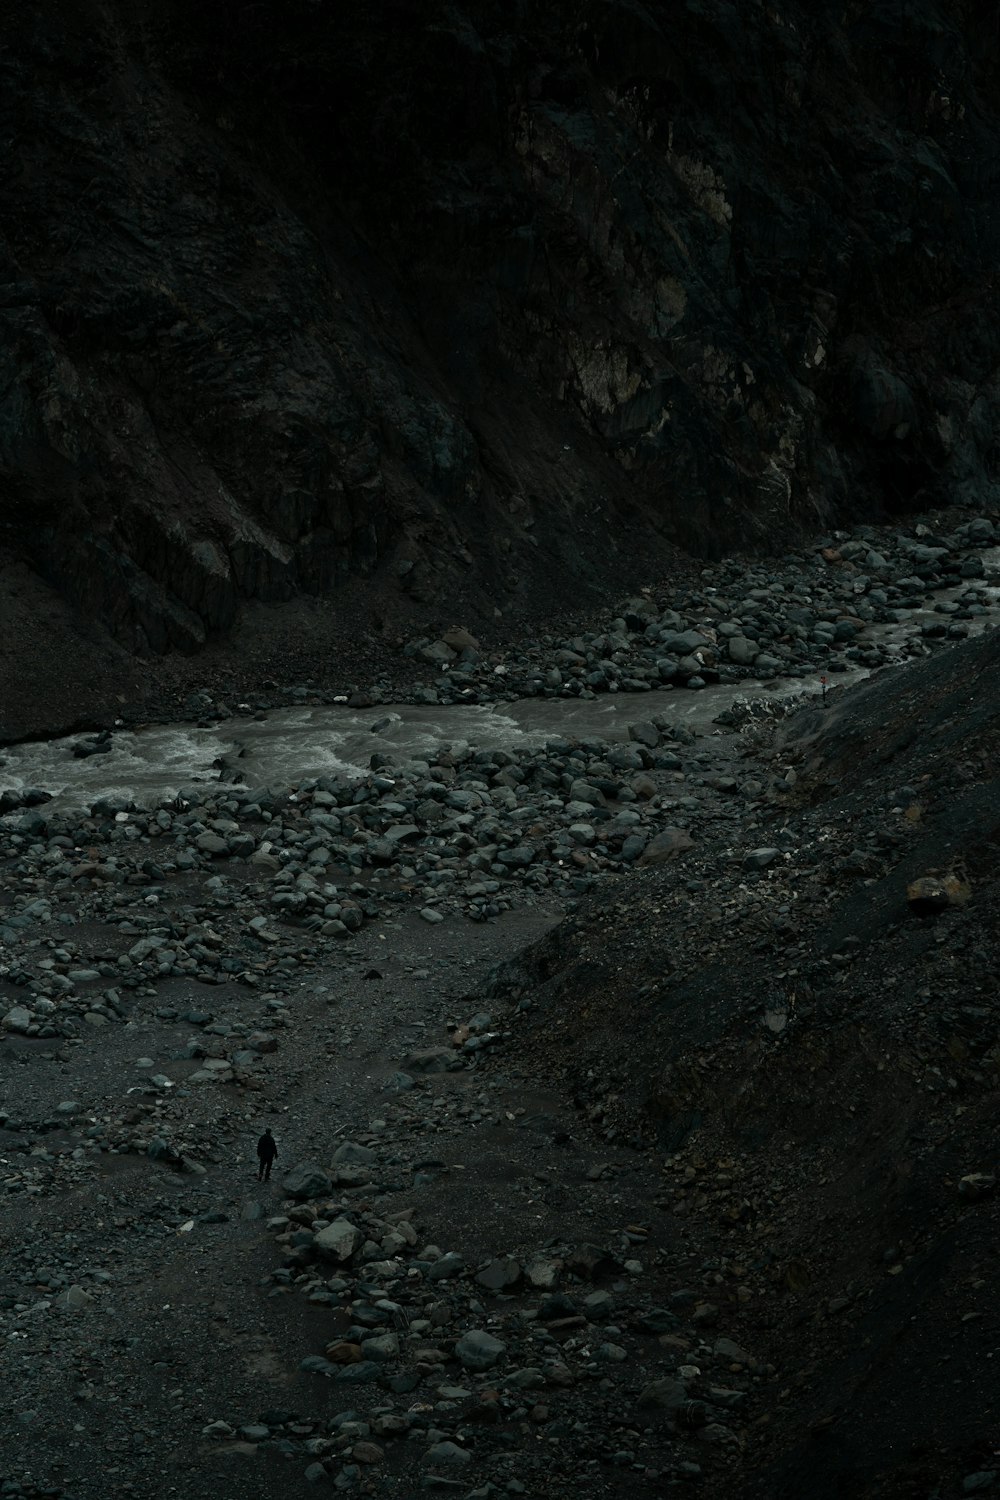 a person walking on a rocky path in the dark